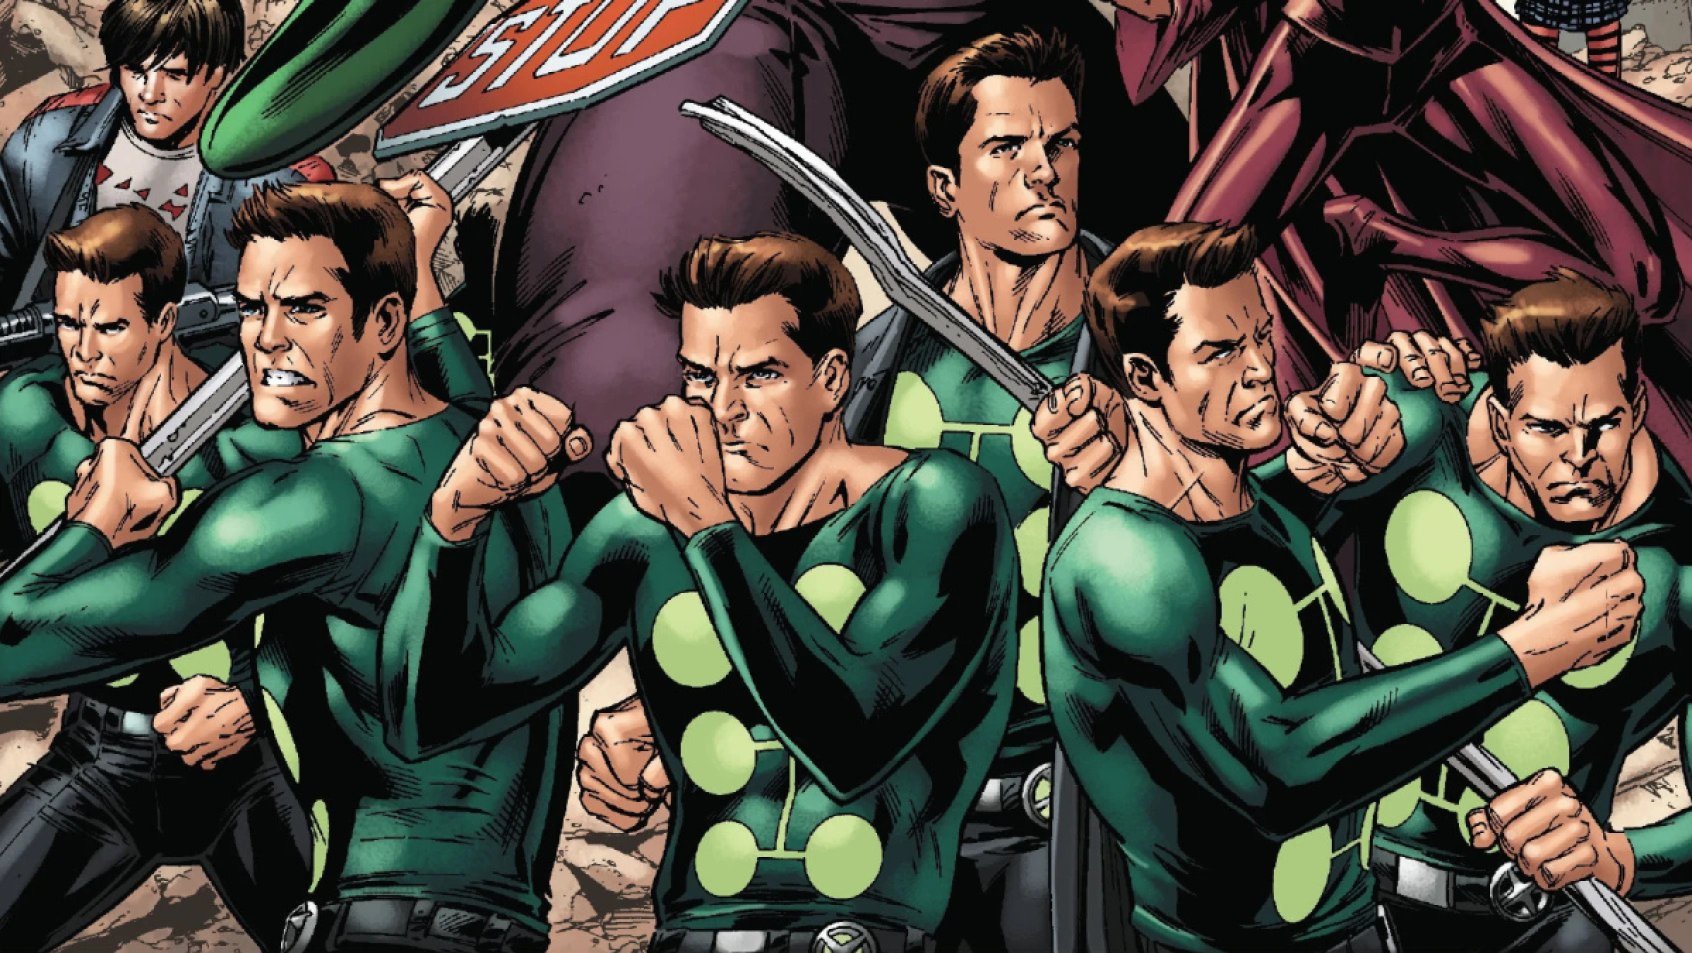 James Madrox as his alter ego Multiple Man in Marvel Comics